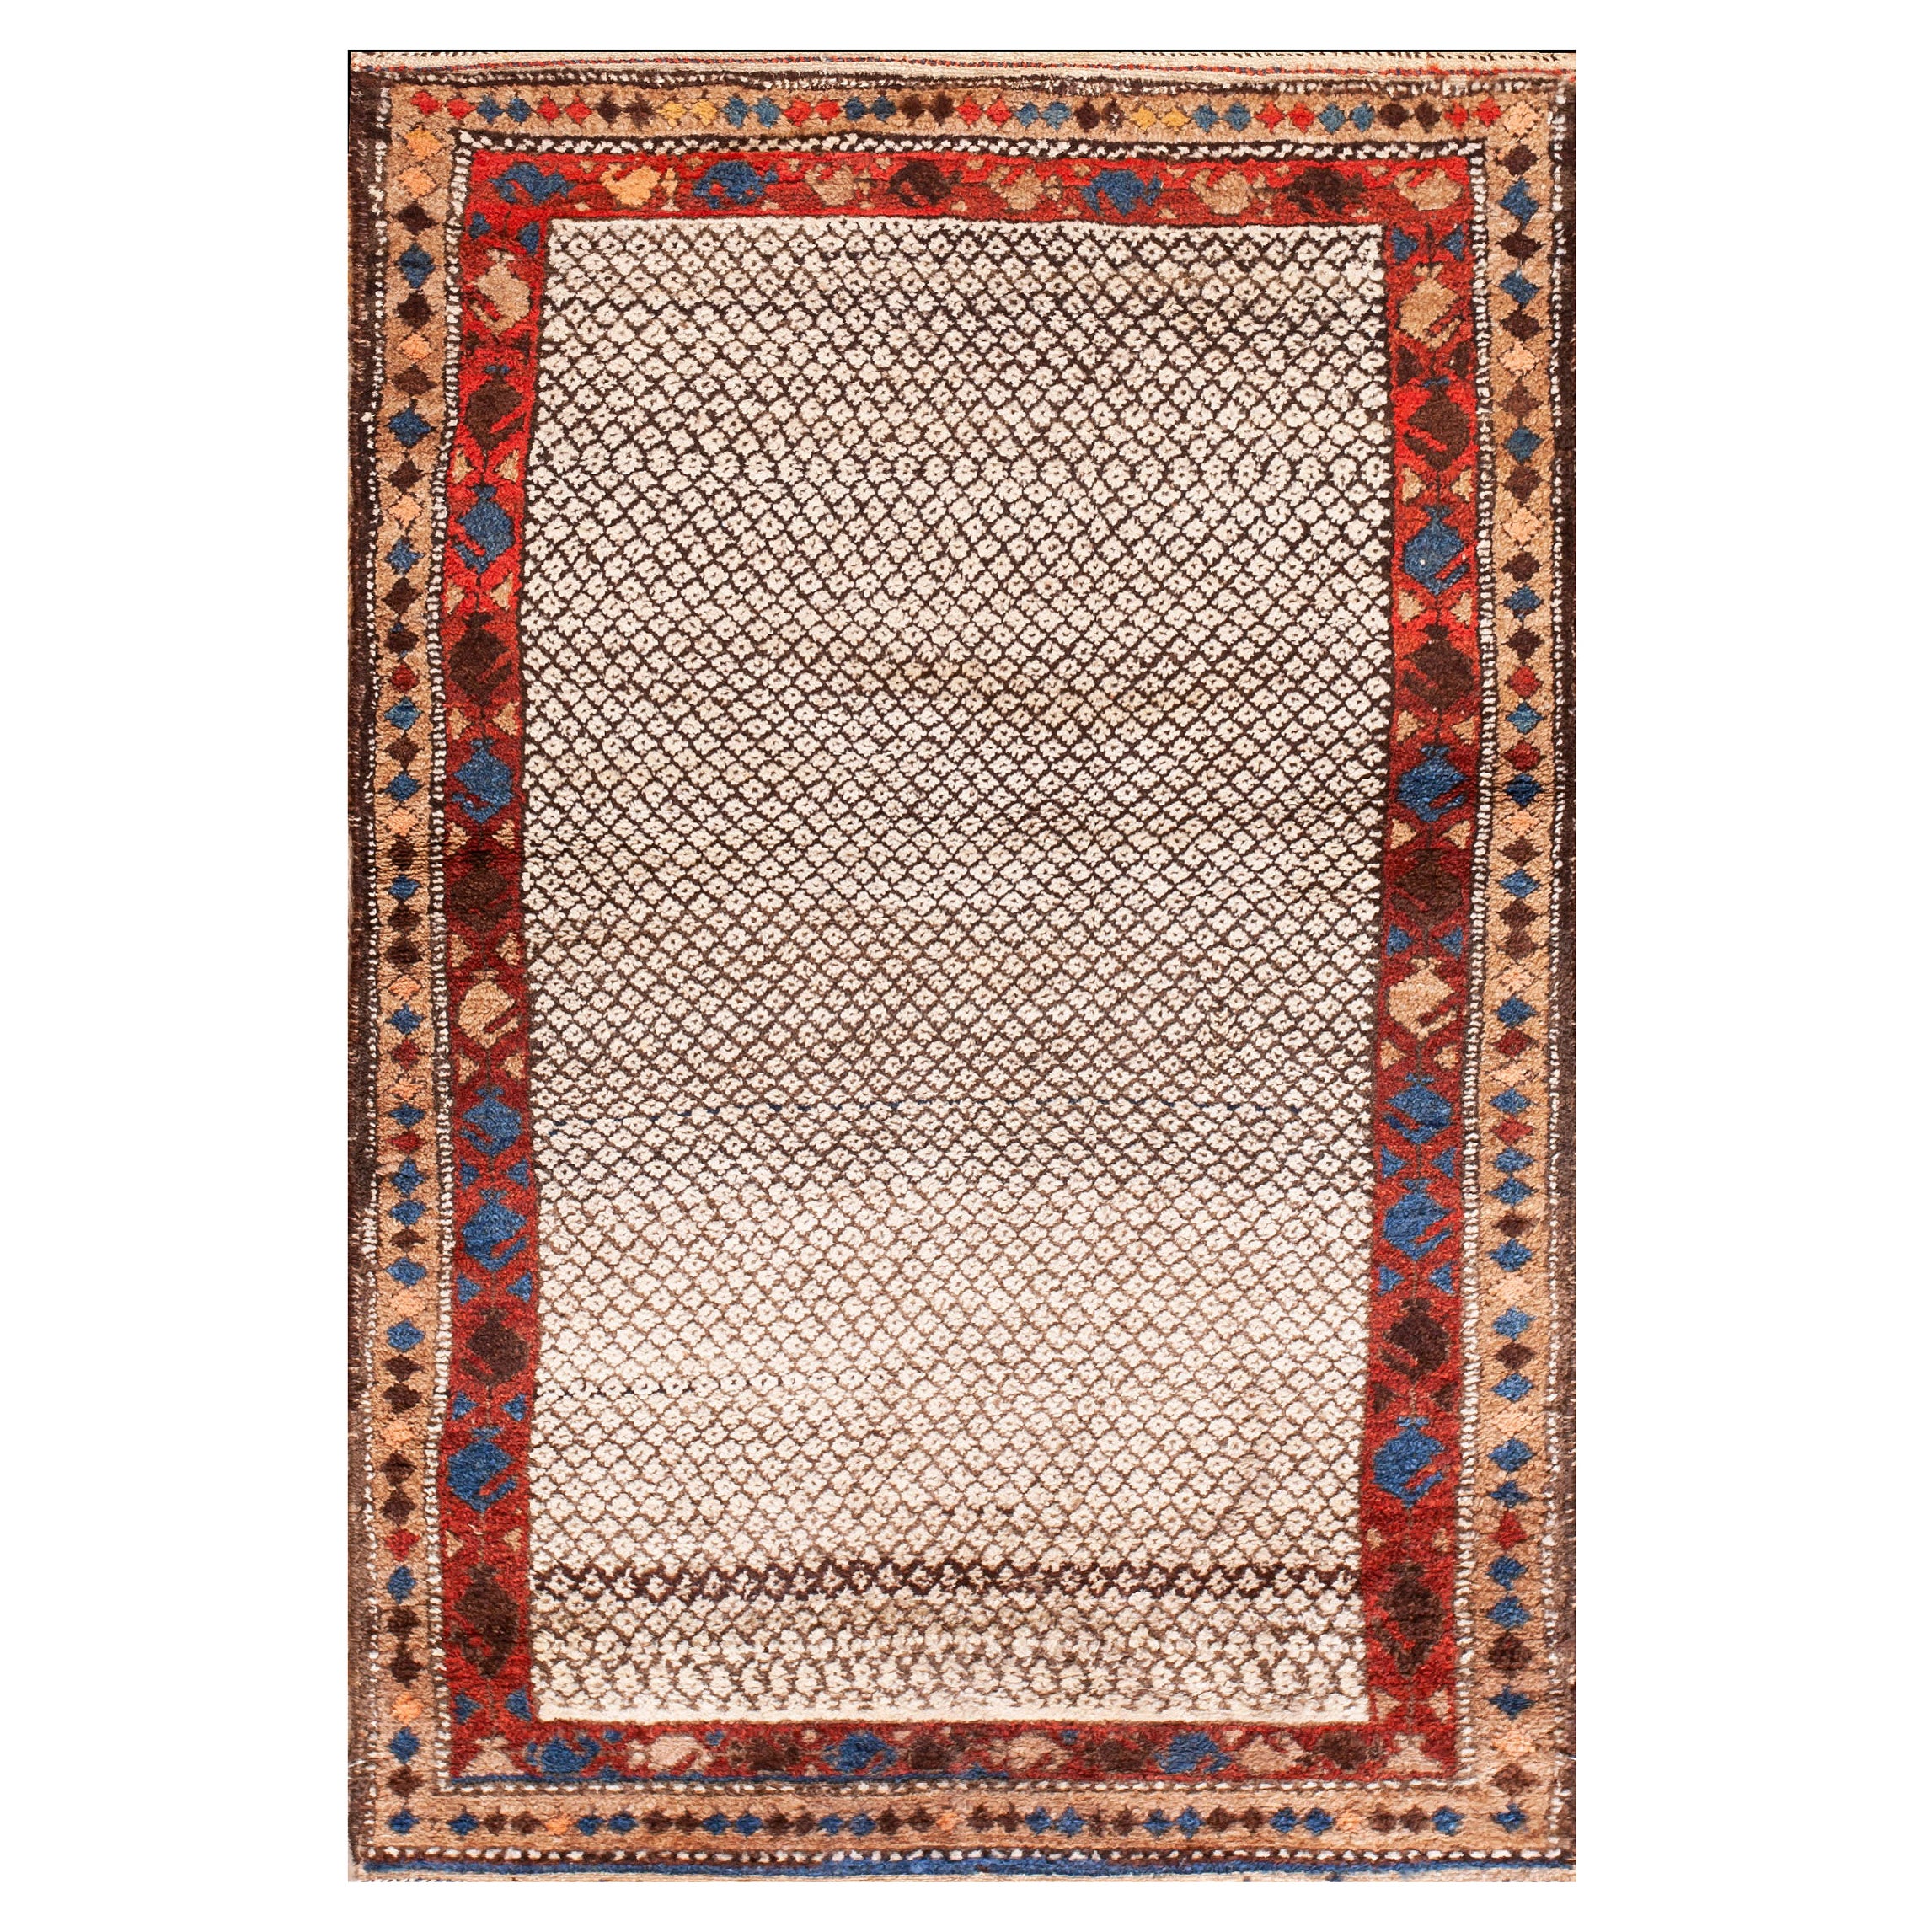 Antique NW Persian Rug  ( 3' 4" x 5' - 102 x 153 cm) For Sale